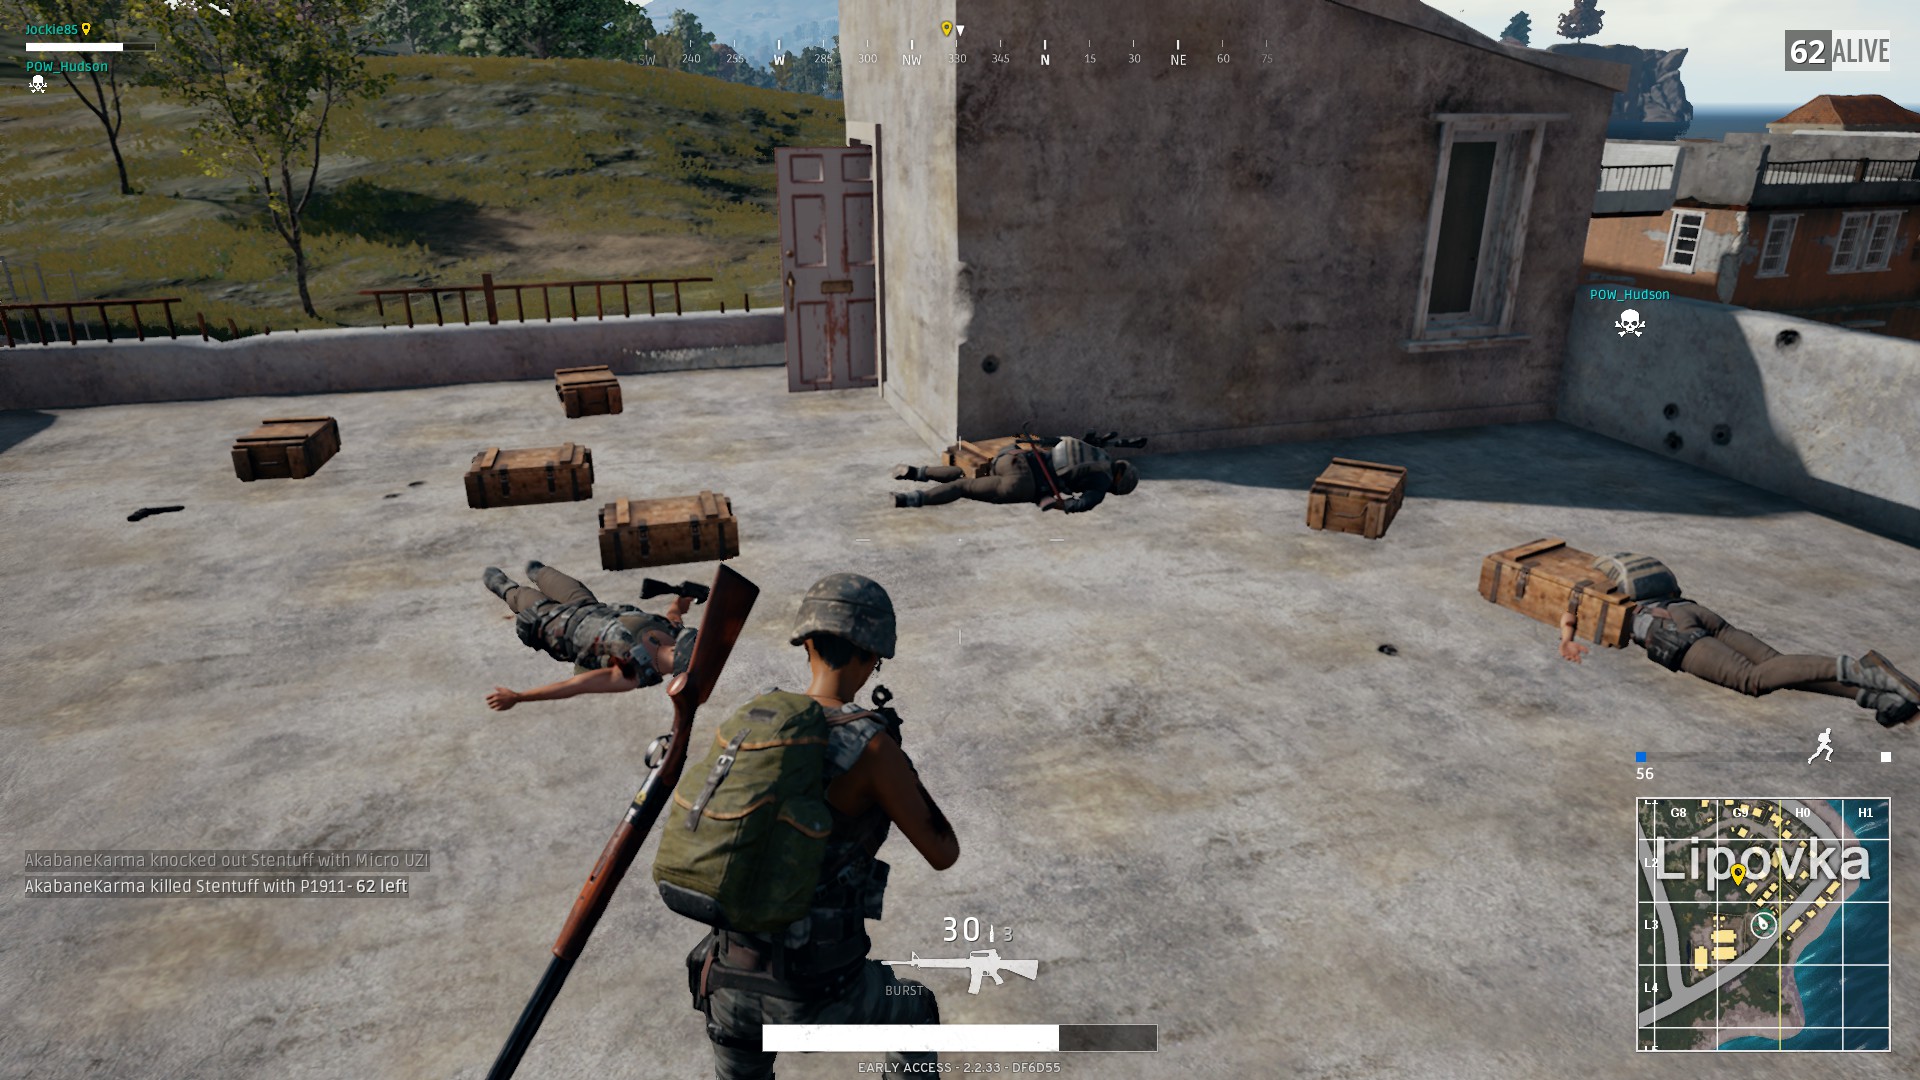 Tips for staying alive in PlayerUnknowns Battlegrounds